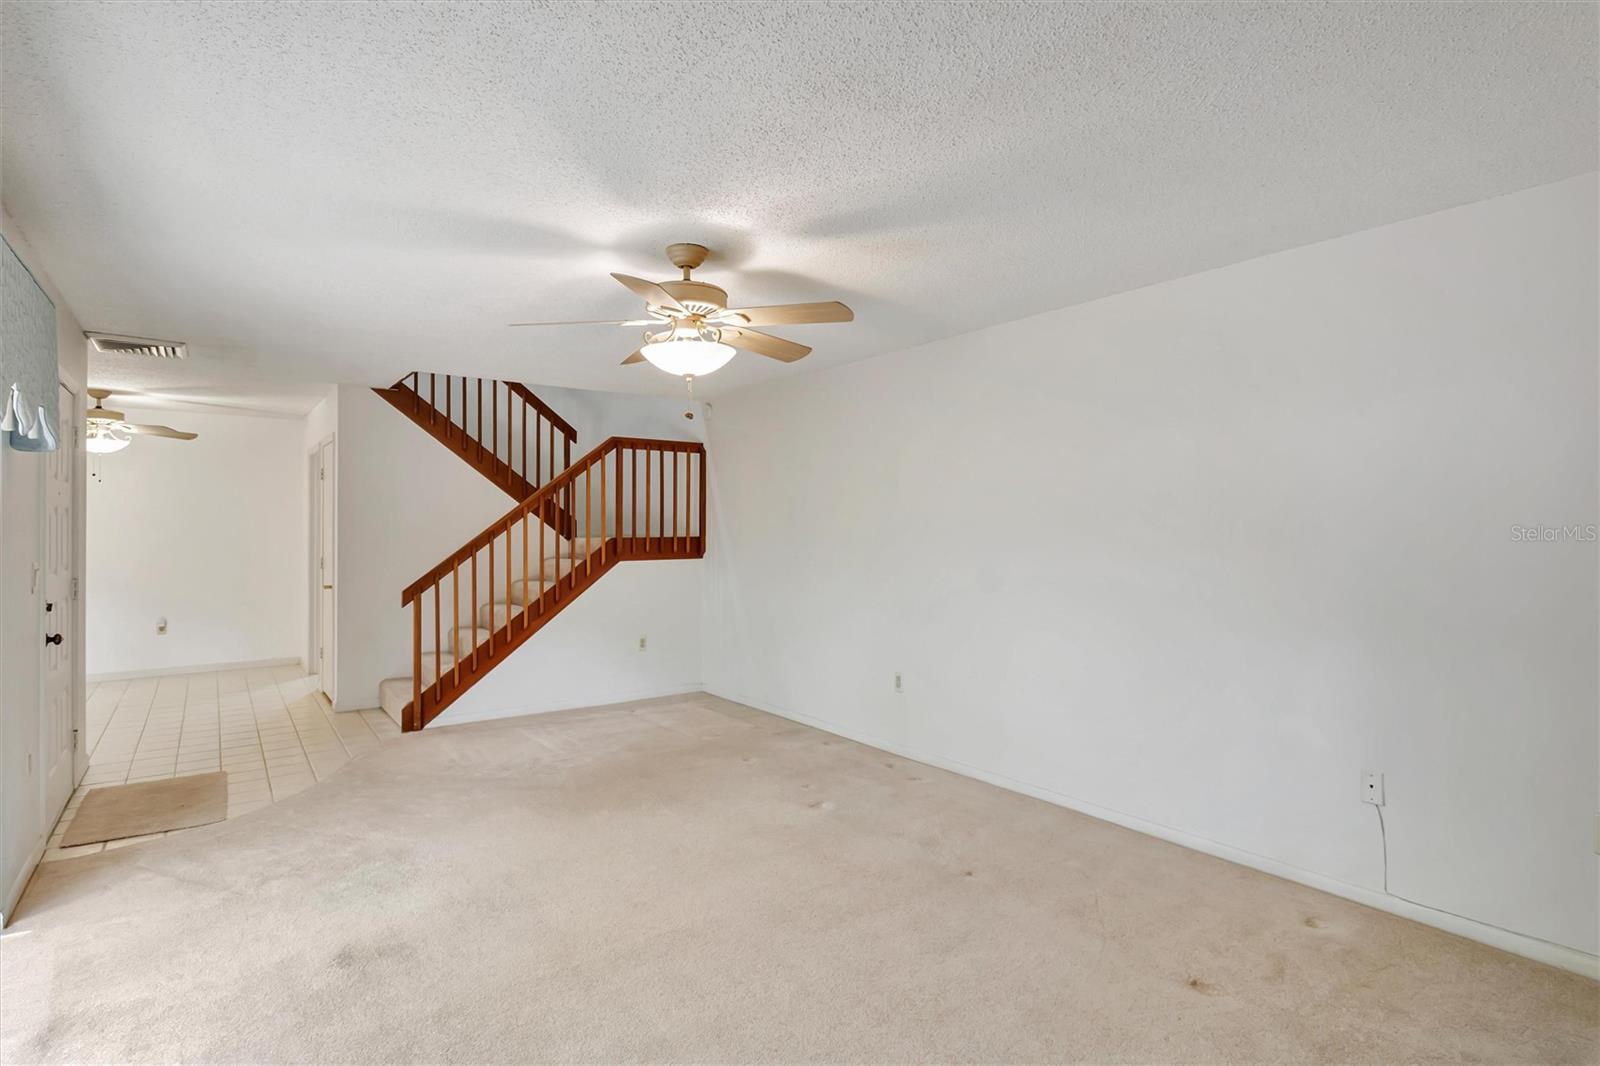 Large living space and ceiling fan